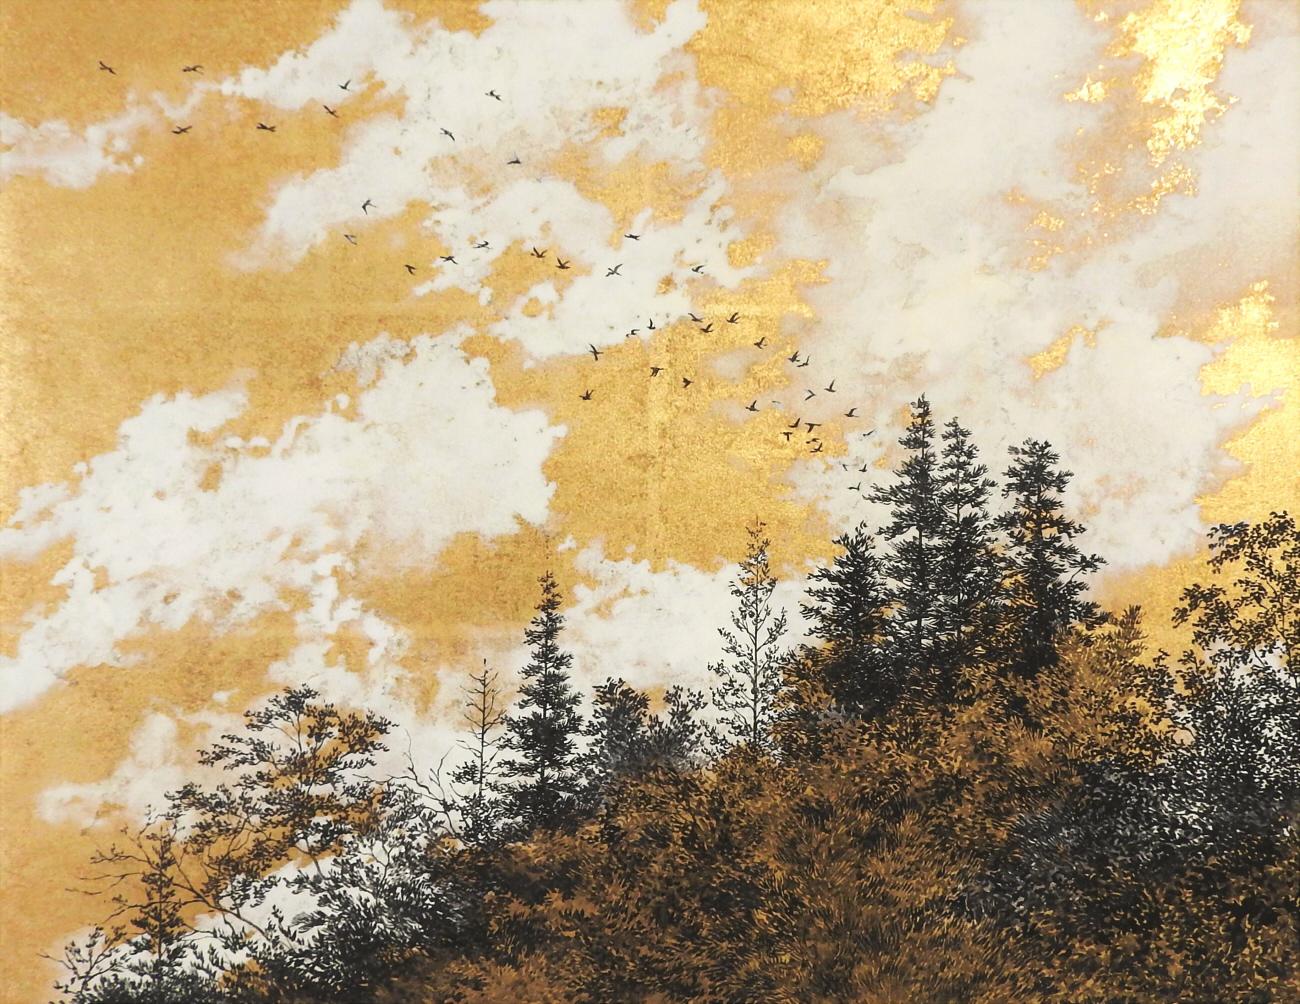 Empathy Towards Things No 3  landscape gold leaf pigment on paper clouds nature - Mixed Media Art by Shoko Okumura